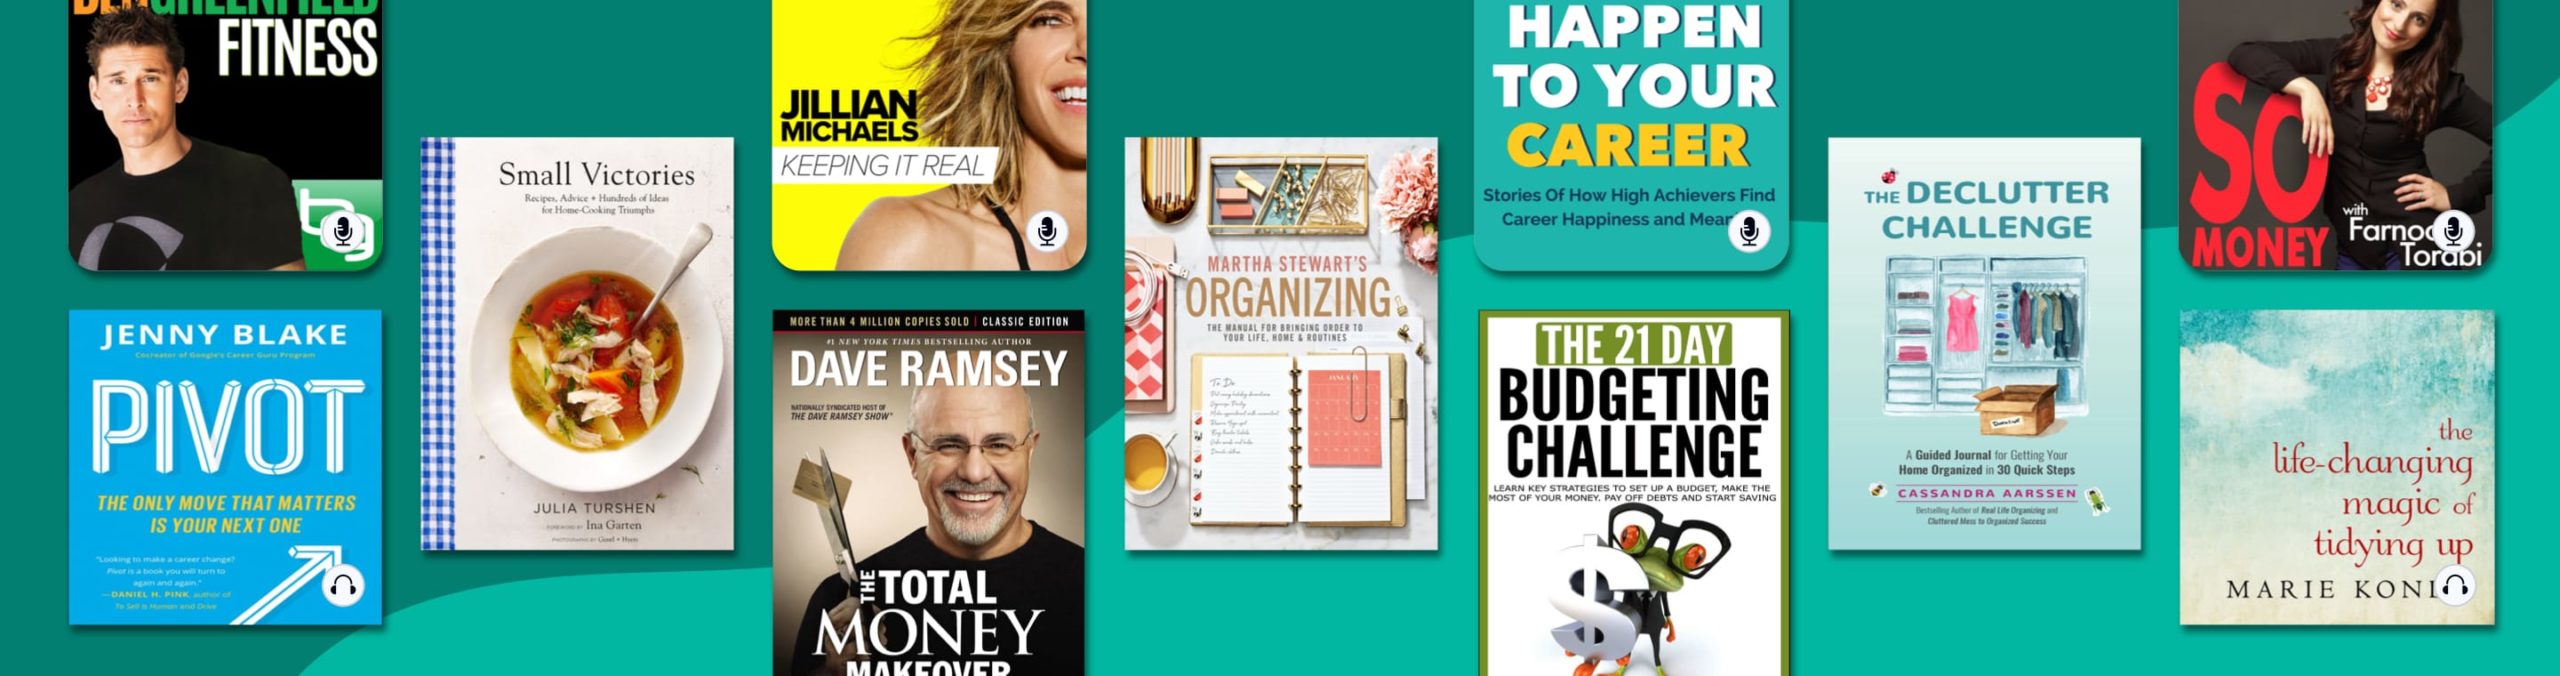 15 resolution-inspiring books, from fitness to finances